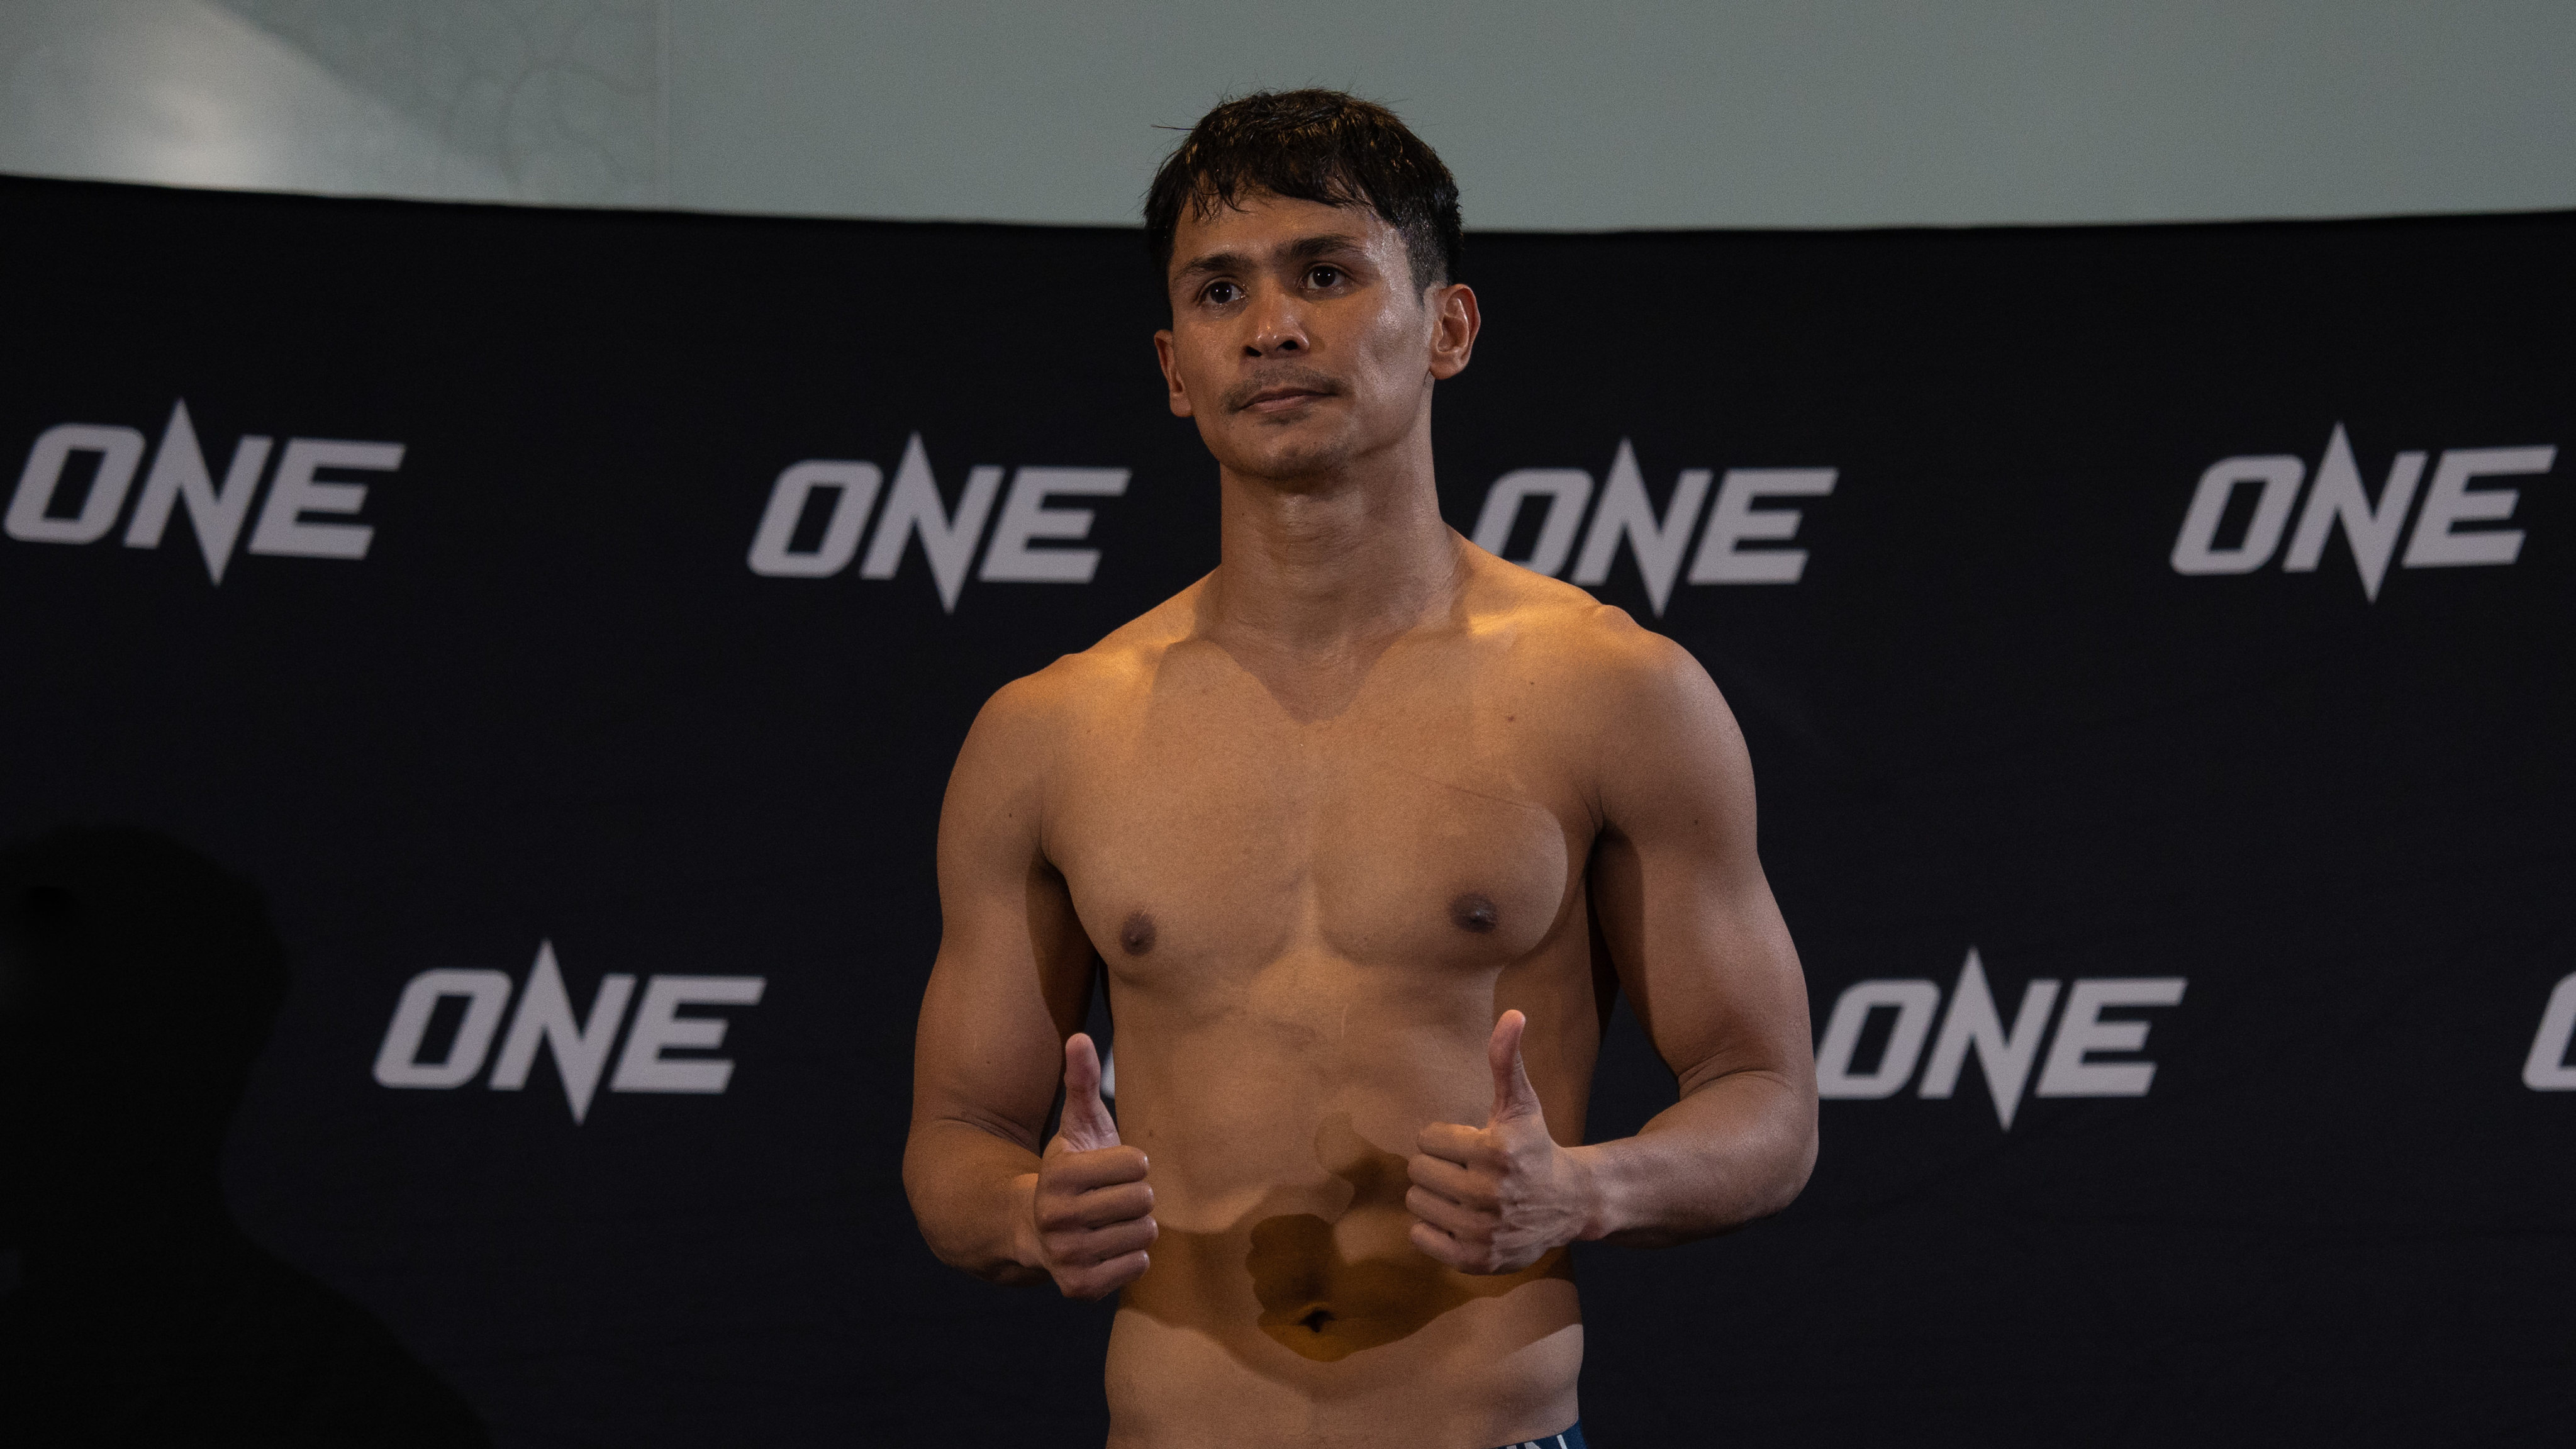 Superbon shows his relief after a dramatic conclusion to the ONE Fight Night 11 official weigh-ins and hydrations tests. Photos: David Picton